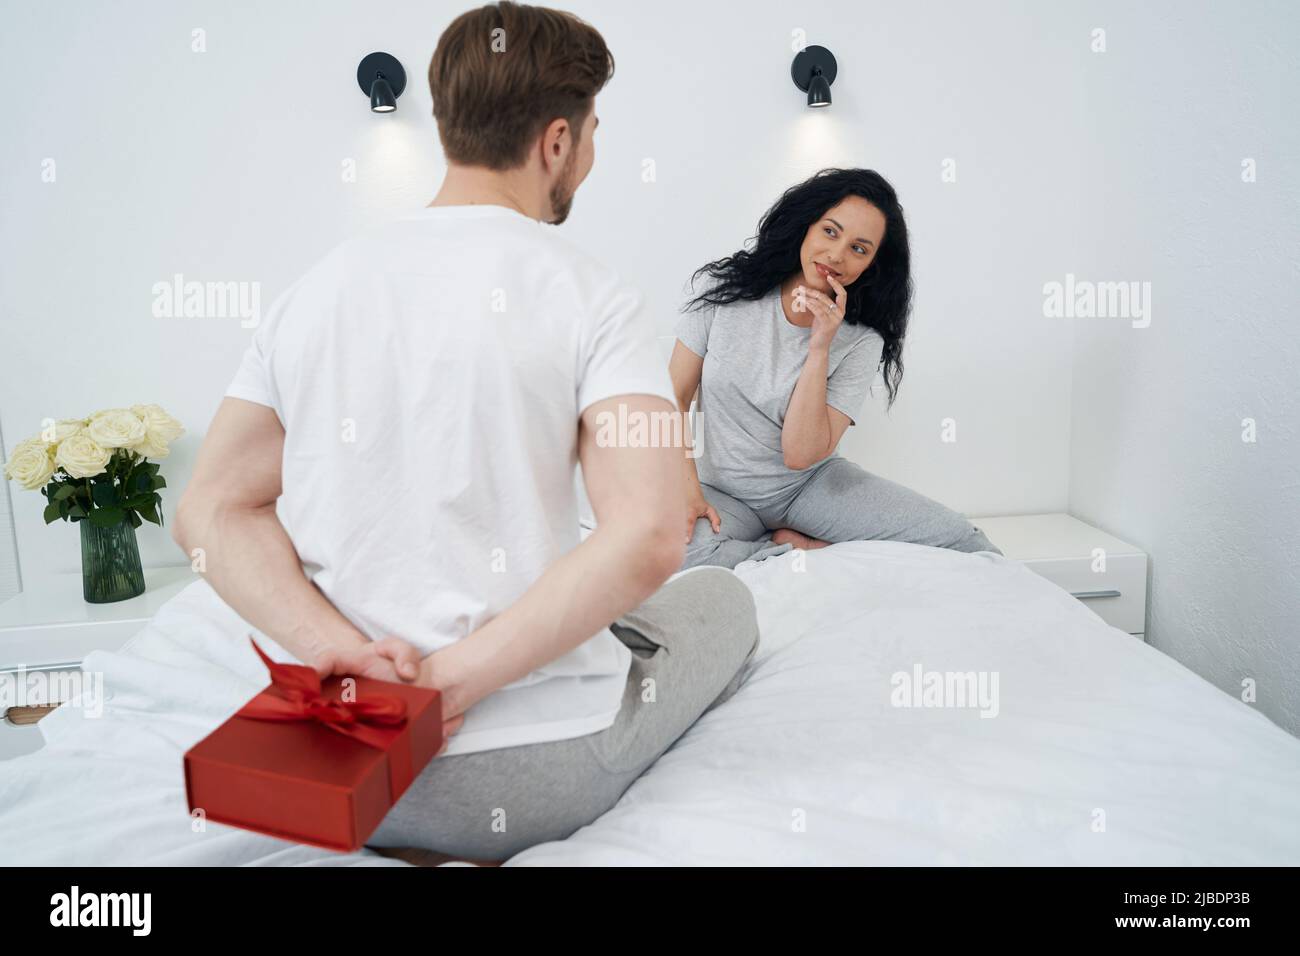 Man hiding present from his life partner Stock Photo